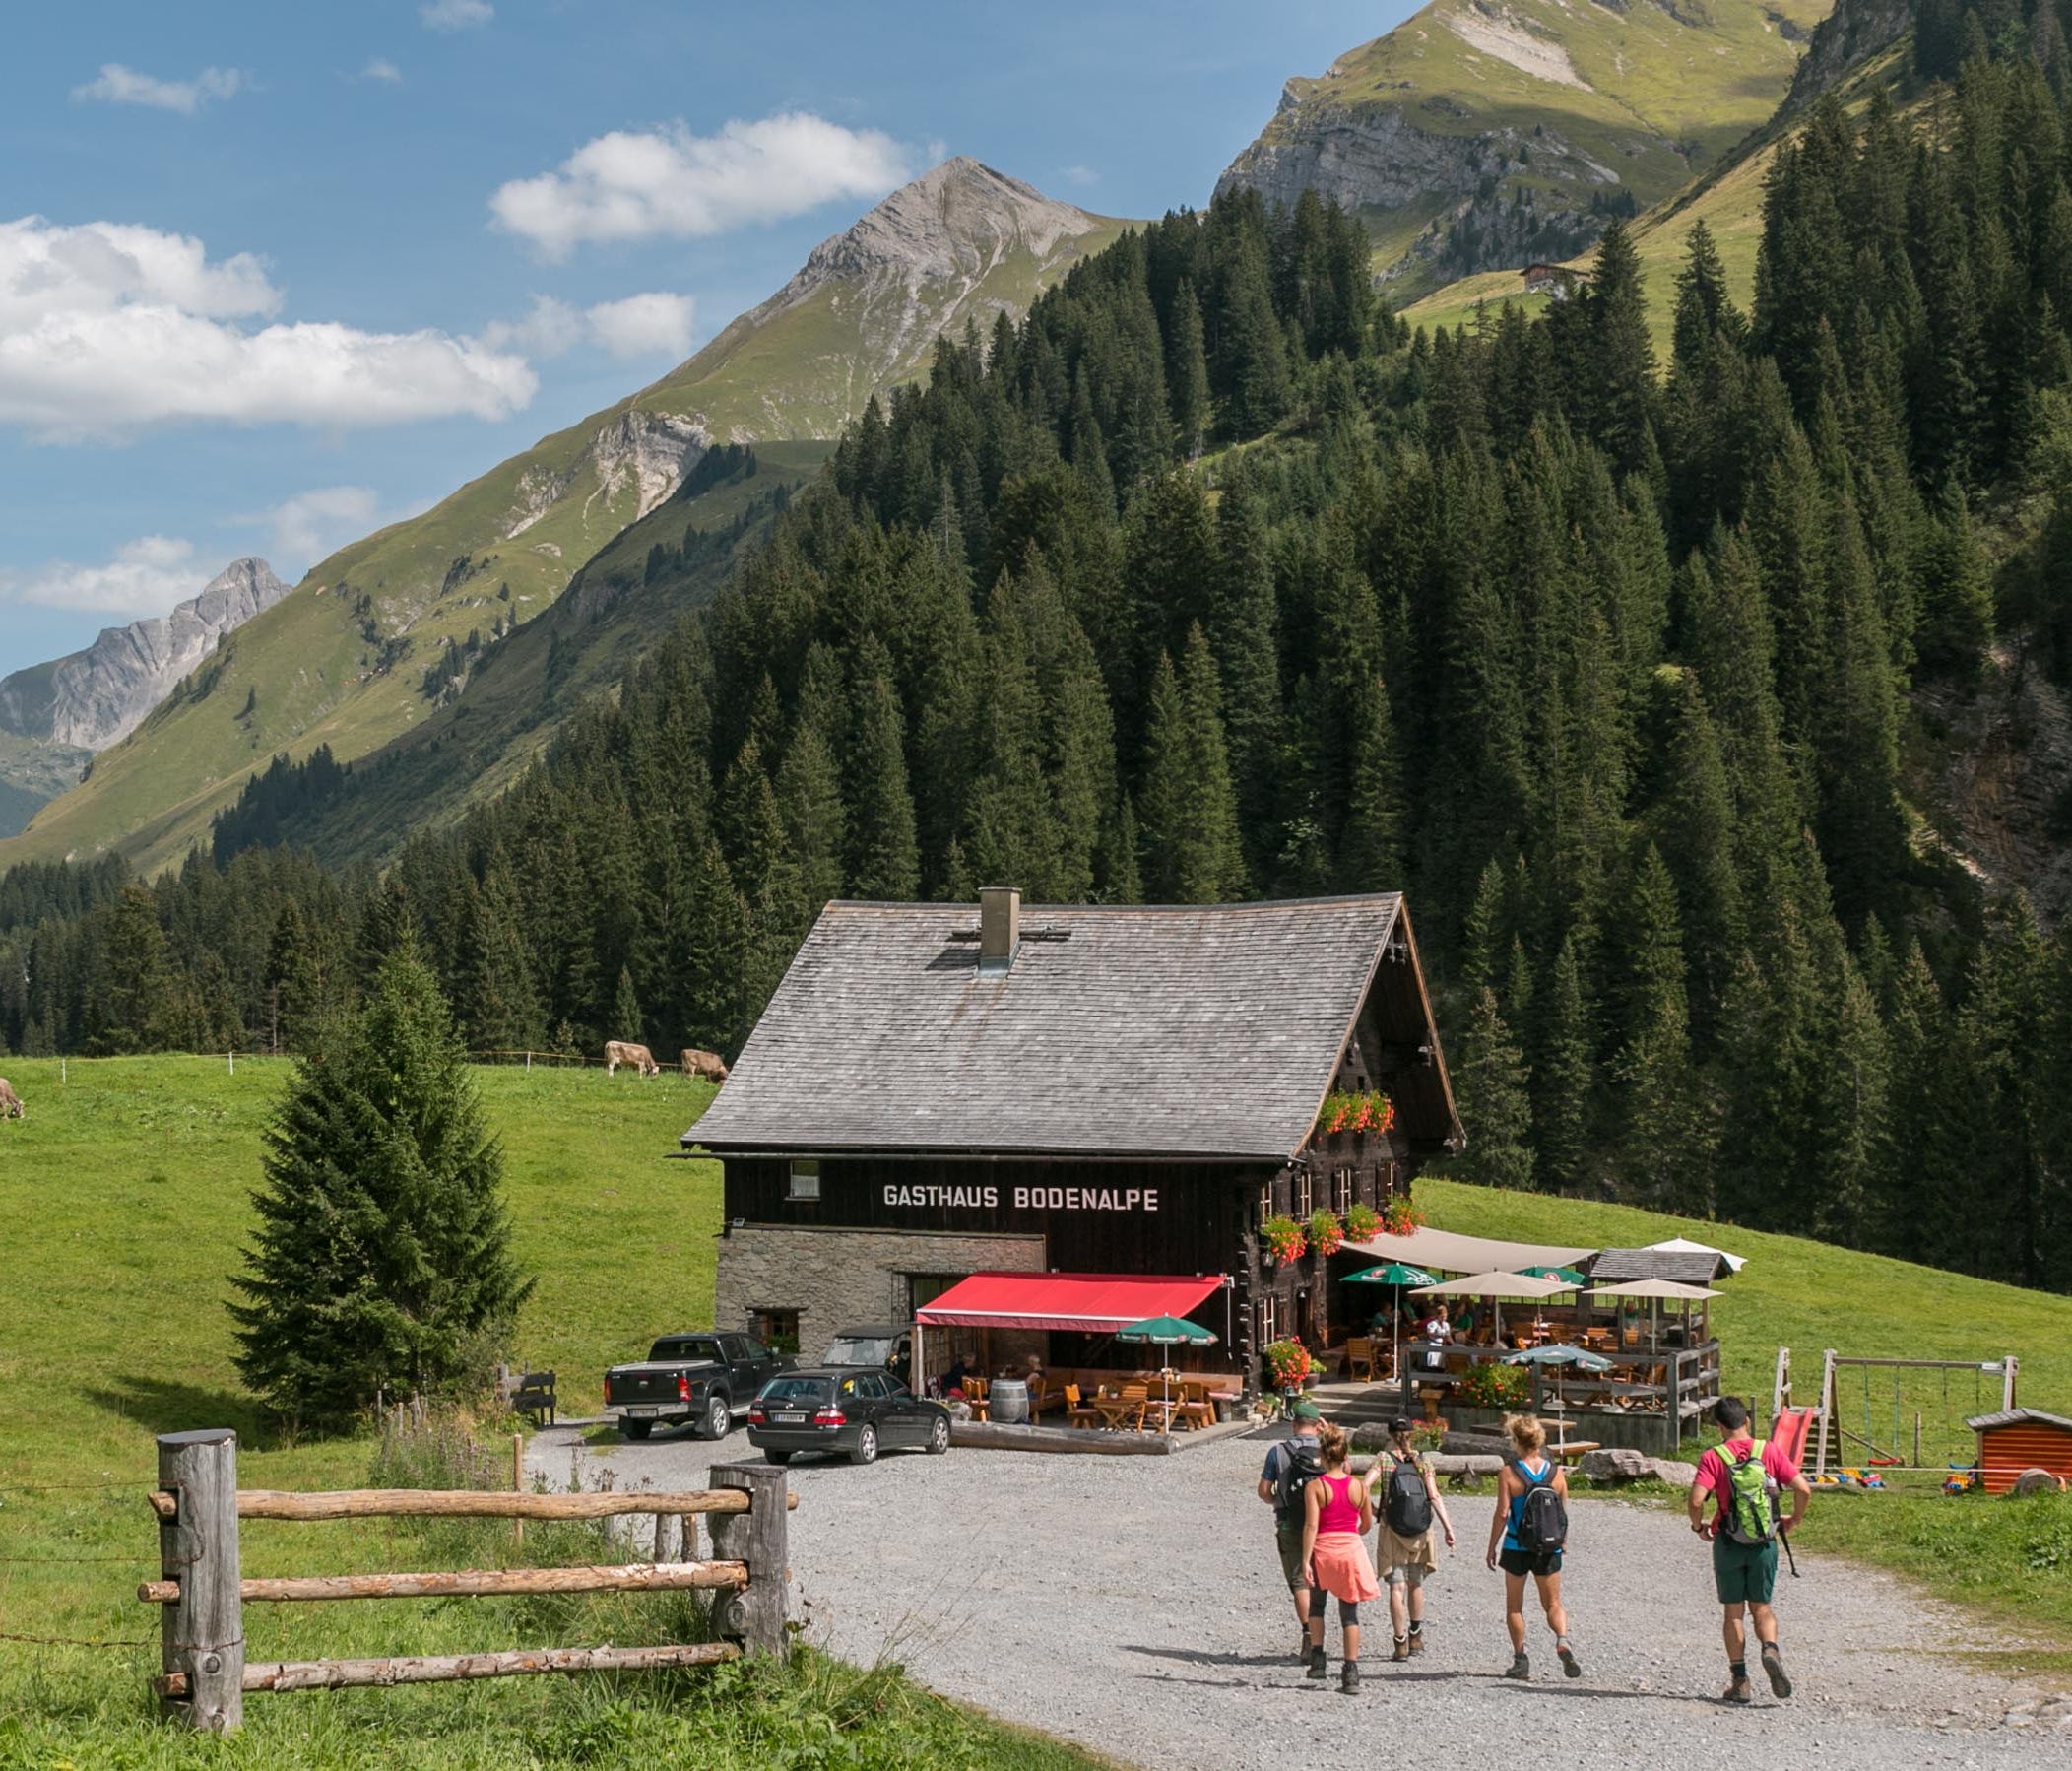 A charming restaurant, Gasthaus Bodenalpe sits nestled at the bottom of a mountain about two miles outside of town.